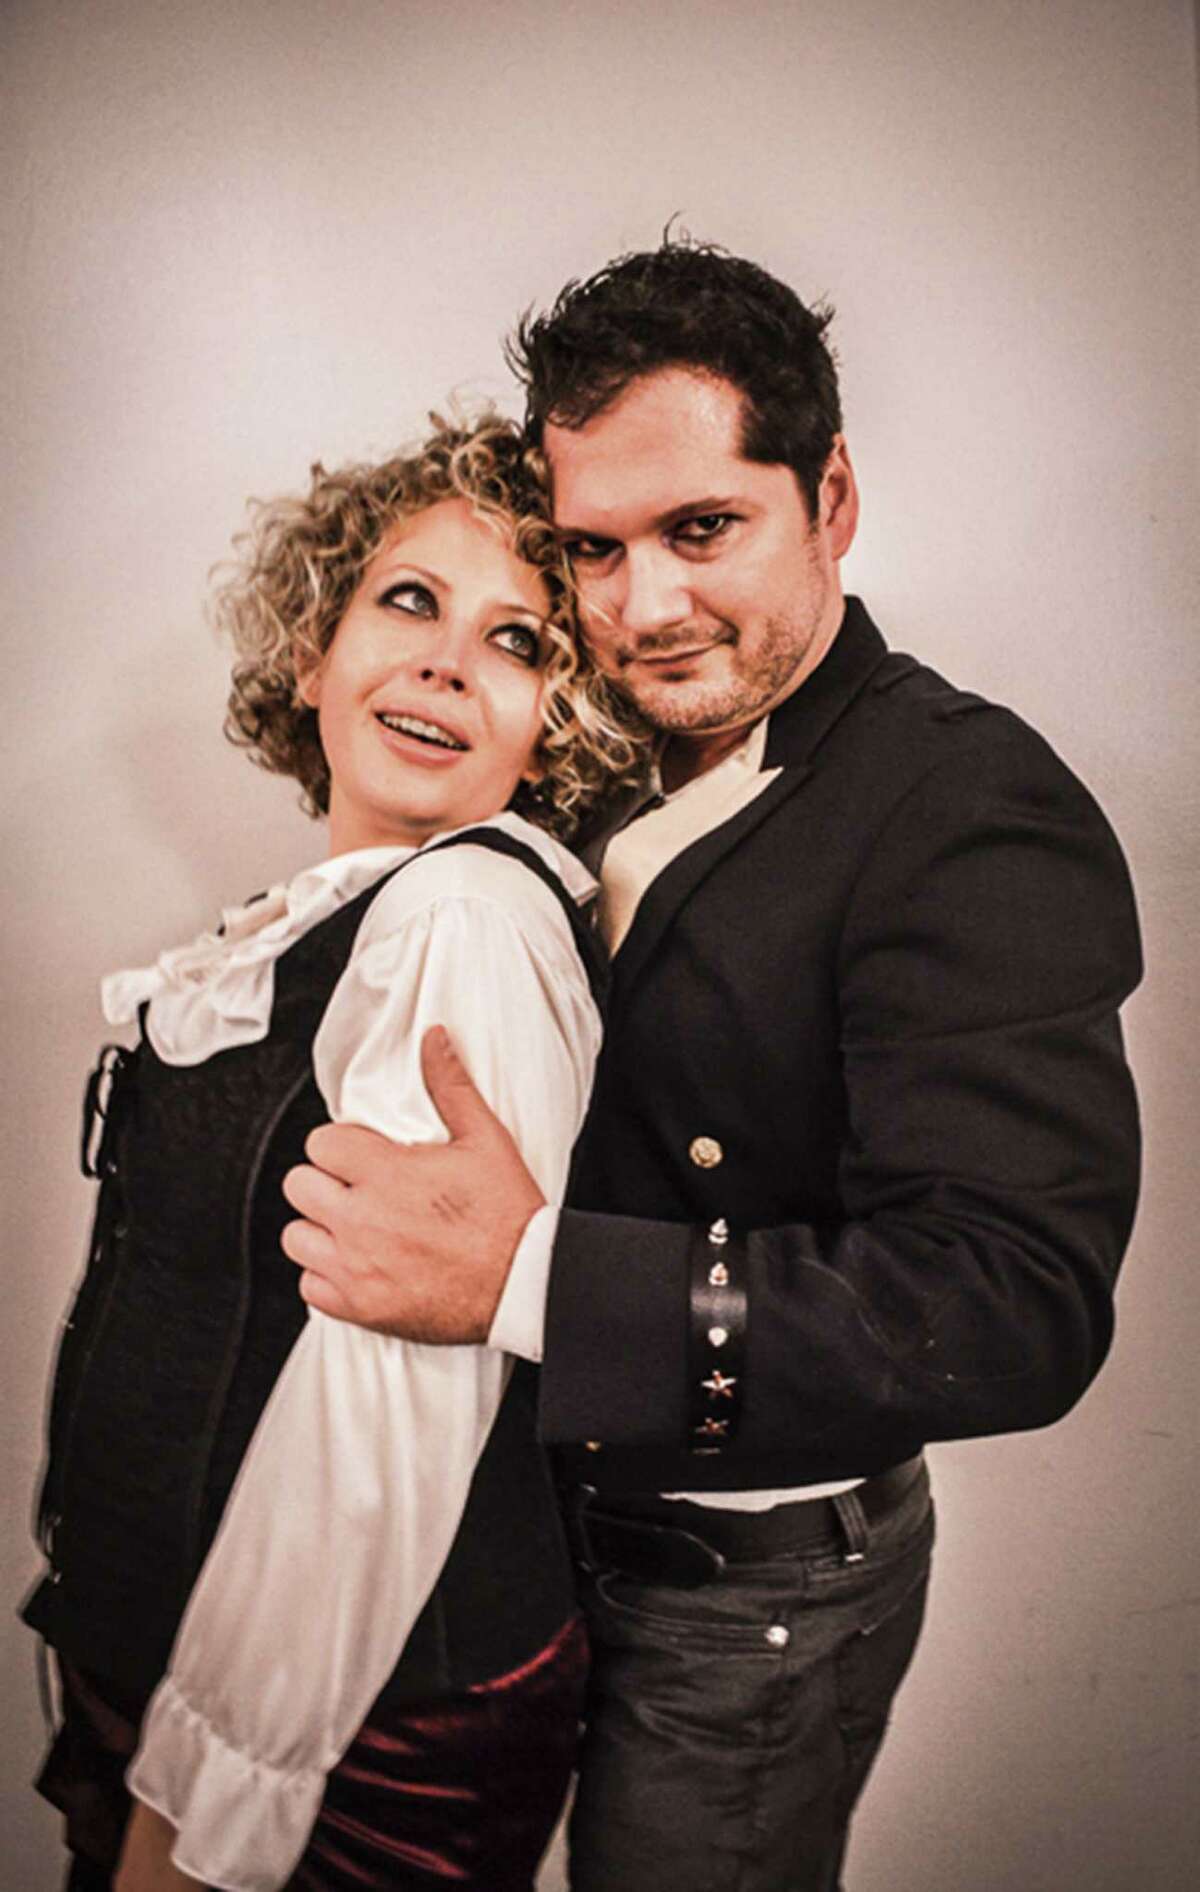 Elise Eversole and Anthony Cortino (who plays Andrew Jackson) star in “Bloody Bloody Andrew Jackson” at the Woodlawn Black Box Theatre.